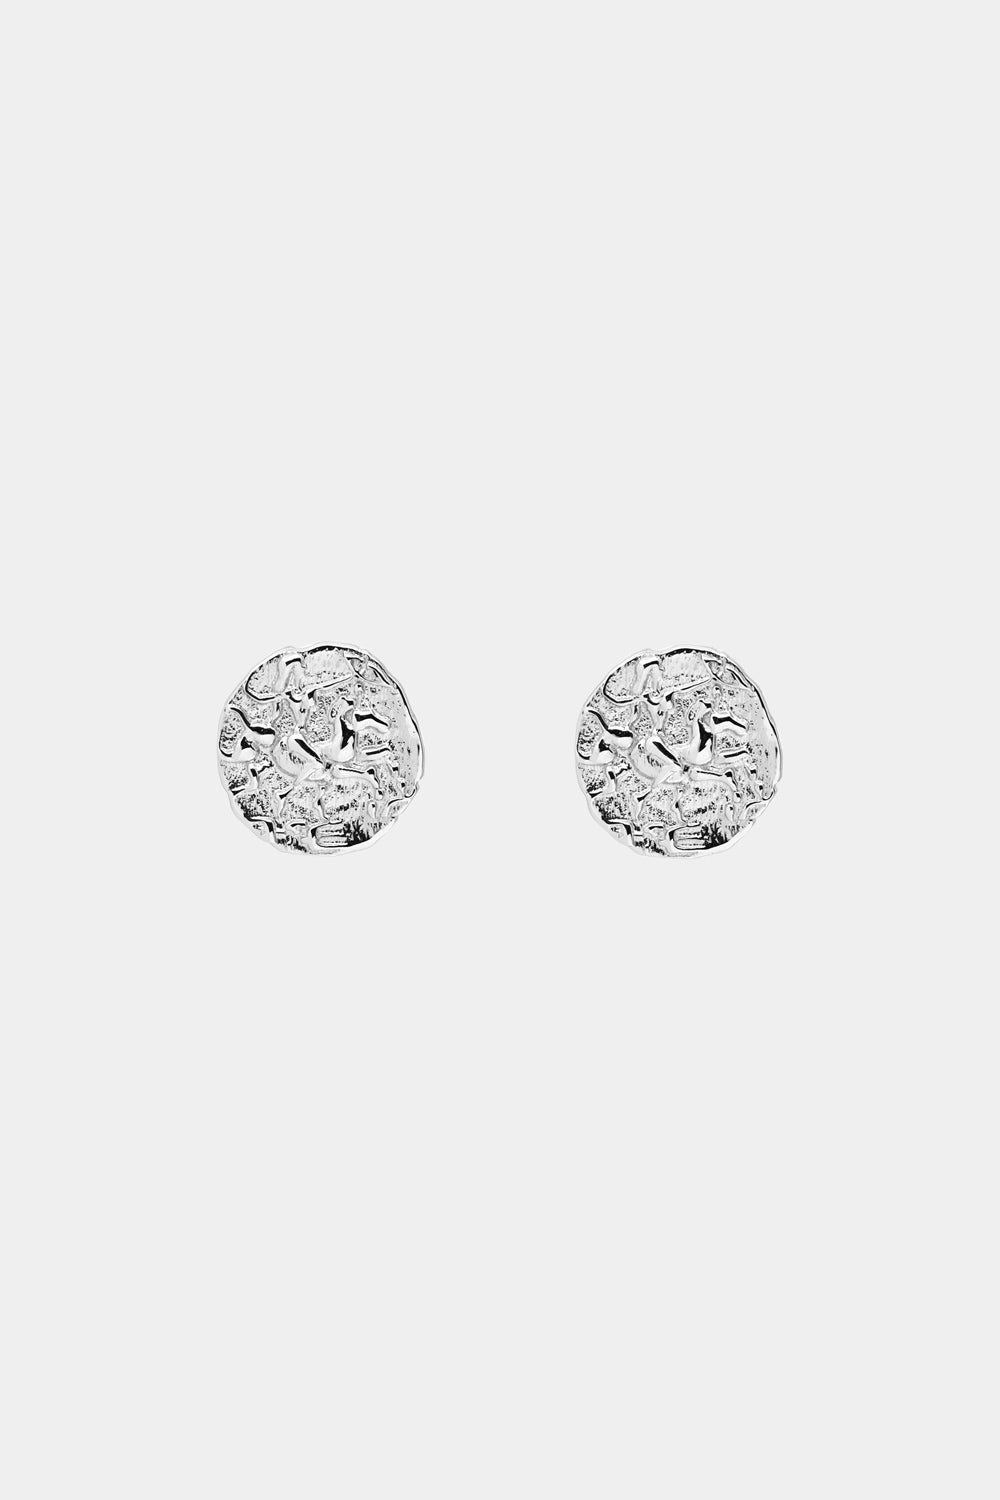 Coin Stud Earrings | Silver or 9K White Gold, More Options Available